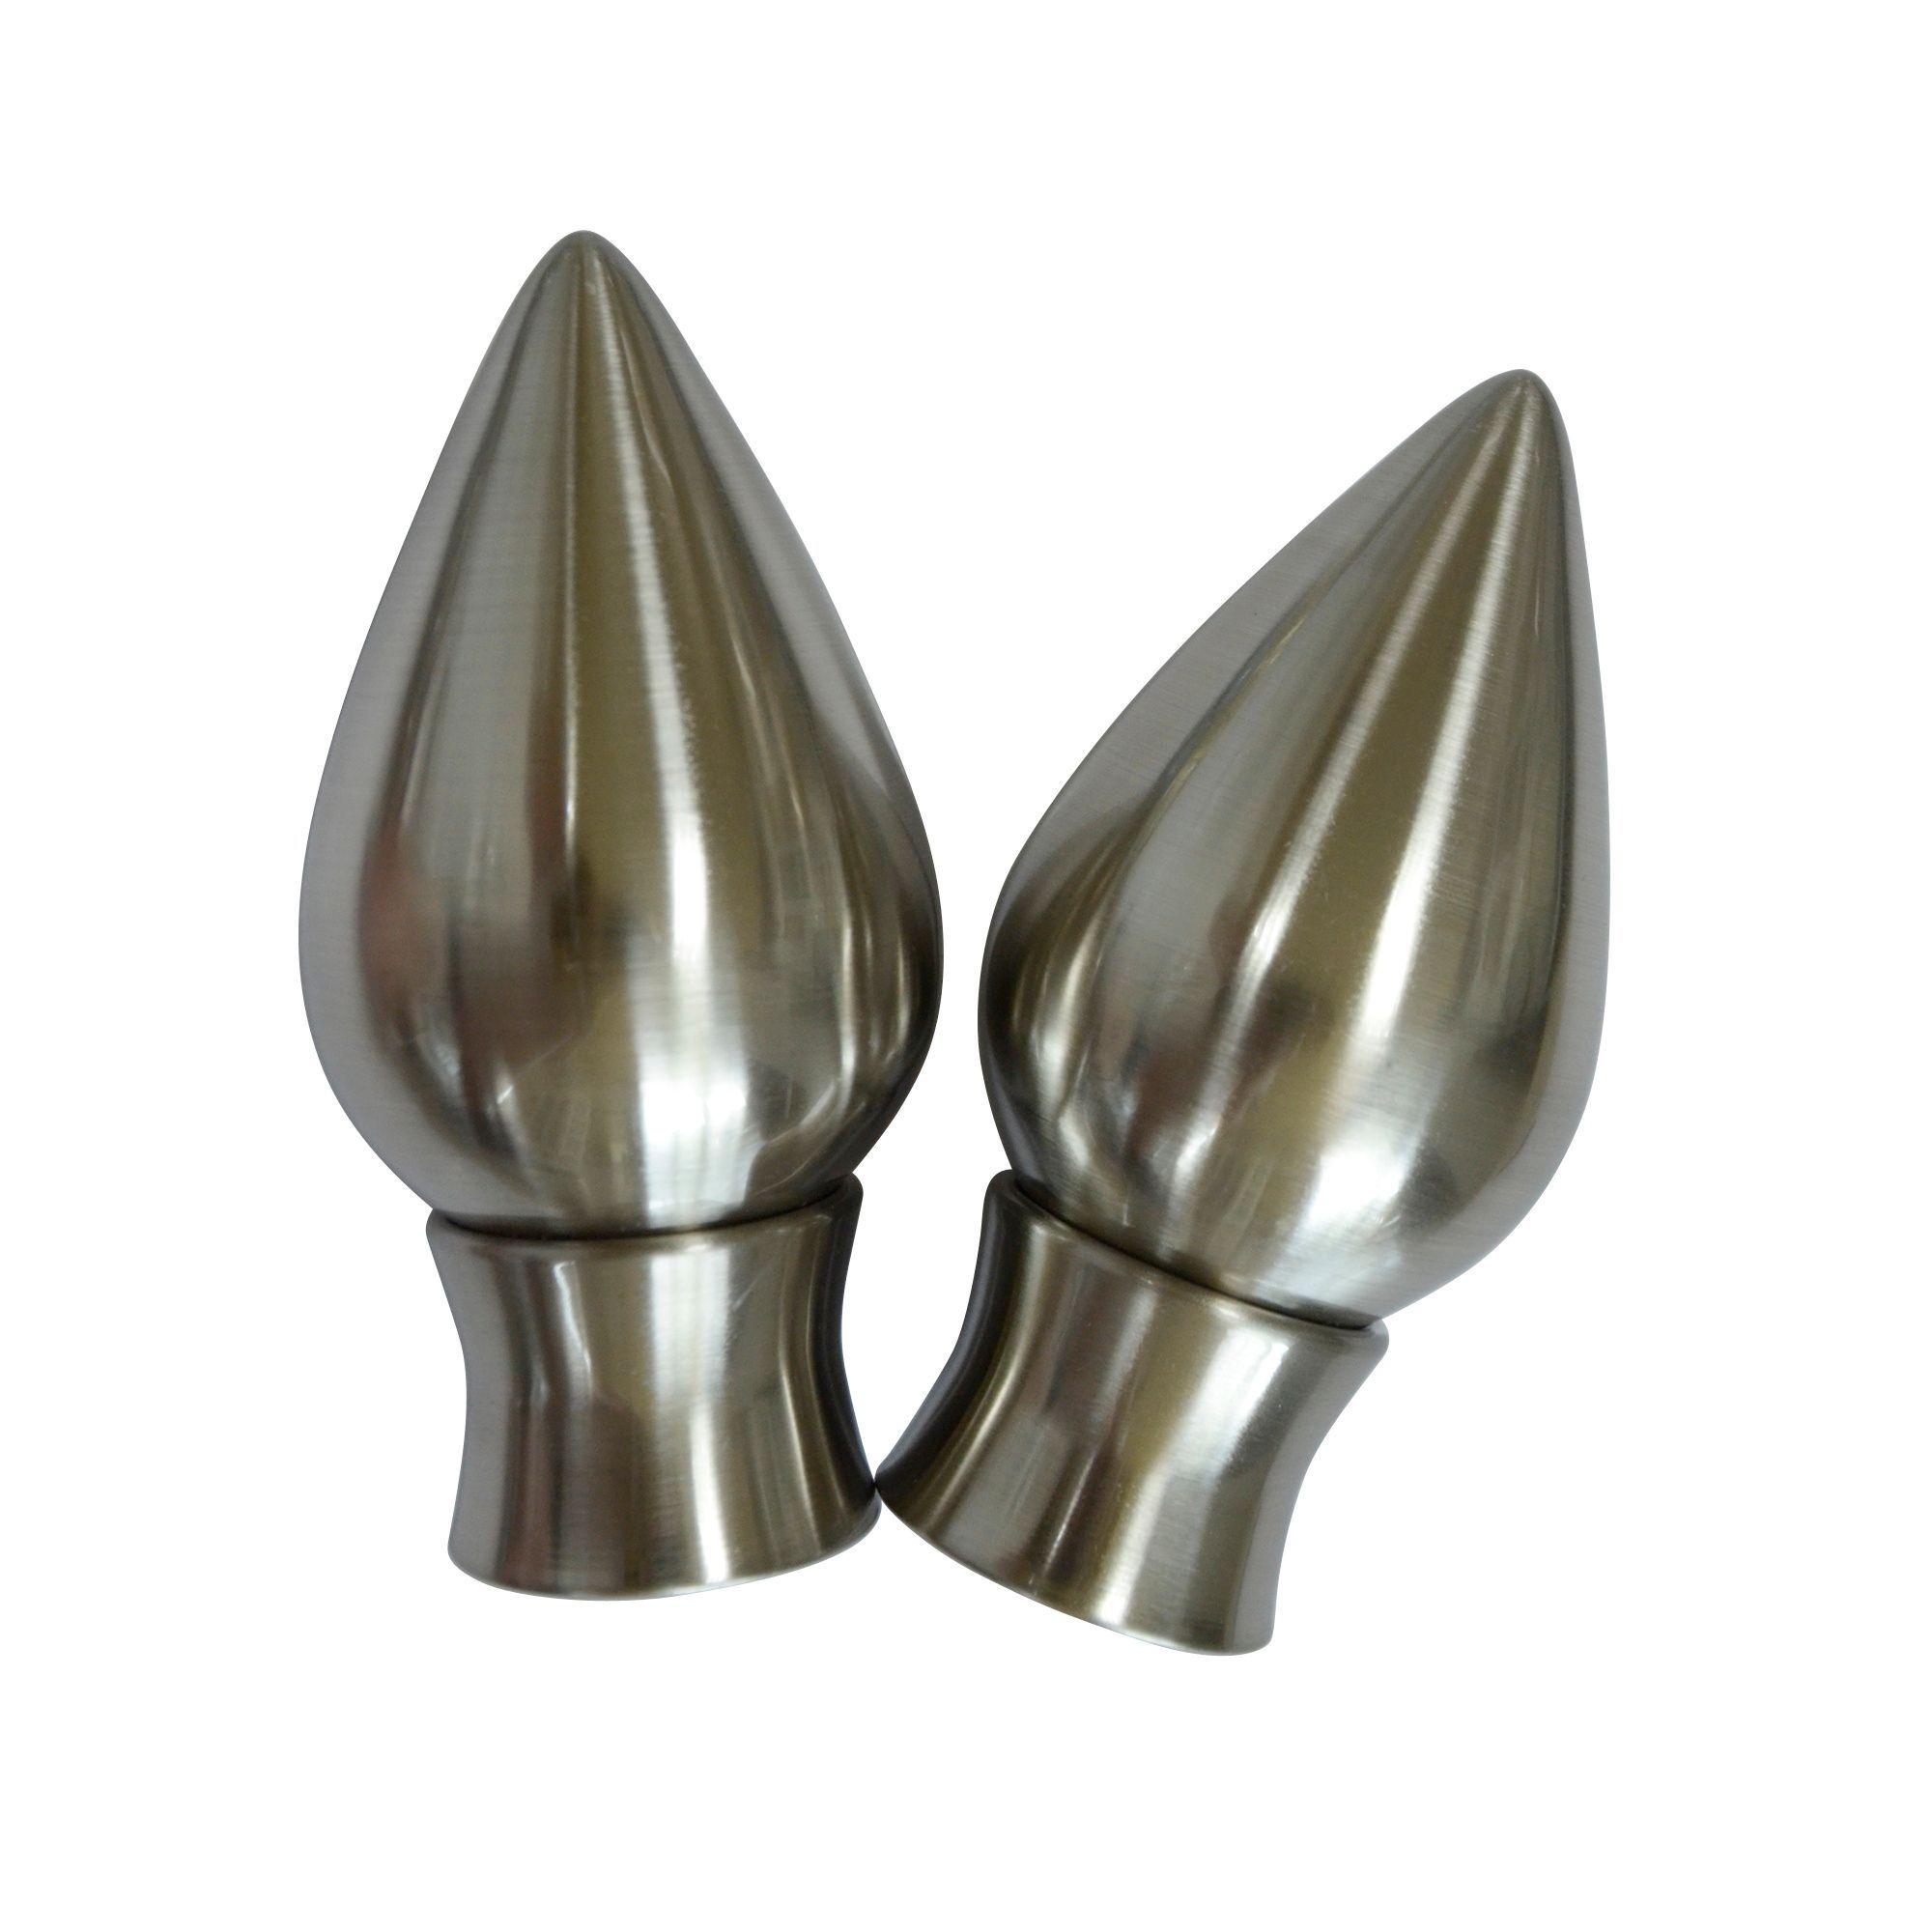 Stainless steel effect Teardrop Curtain pole finial, Pack of 2